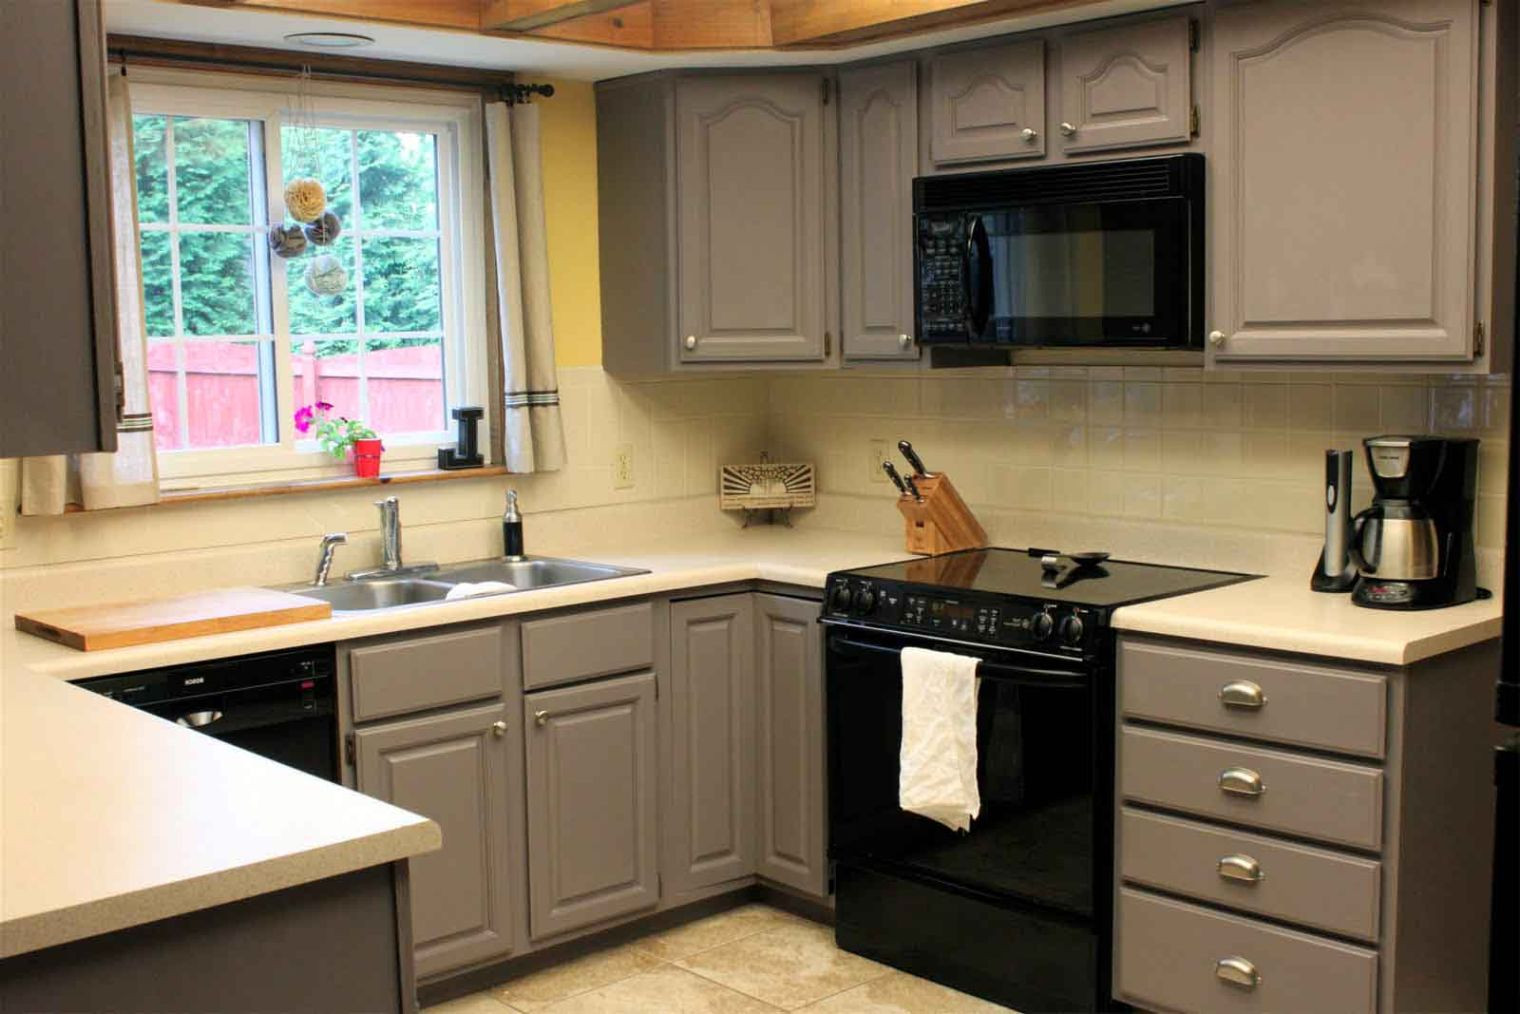 Small Kitchen Cupboard
 Grey painted kitchen cabinets in small kitchen space